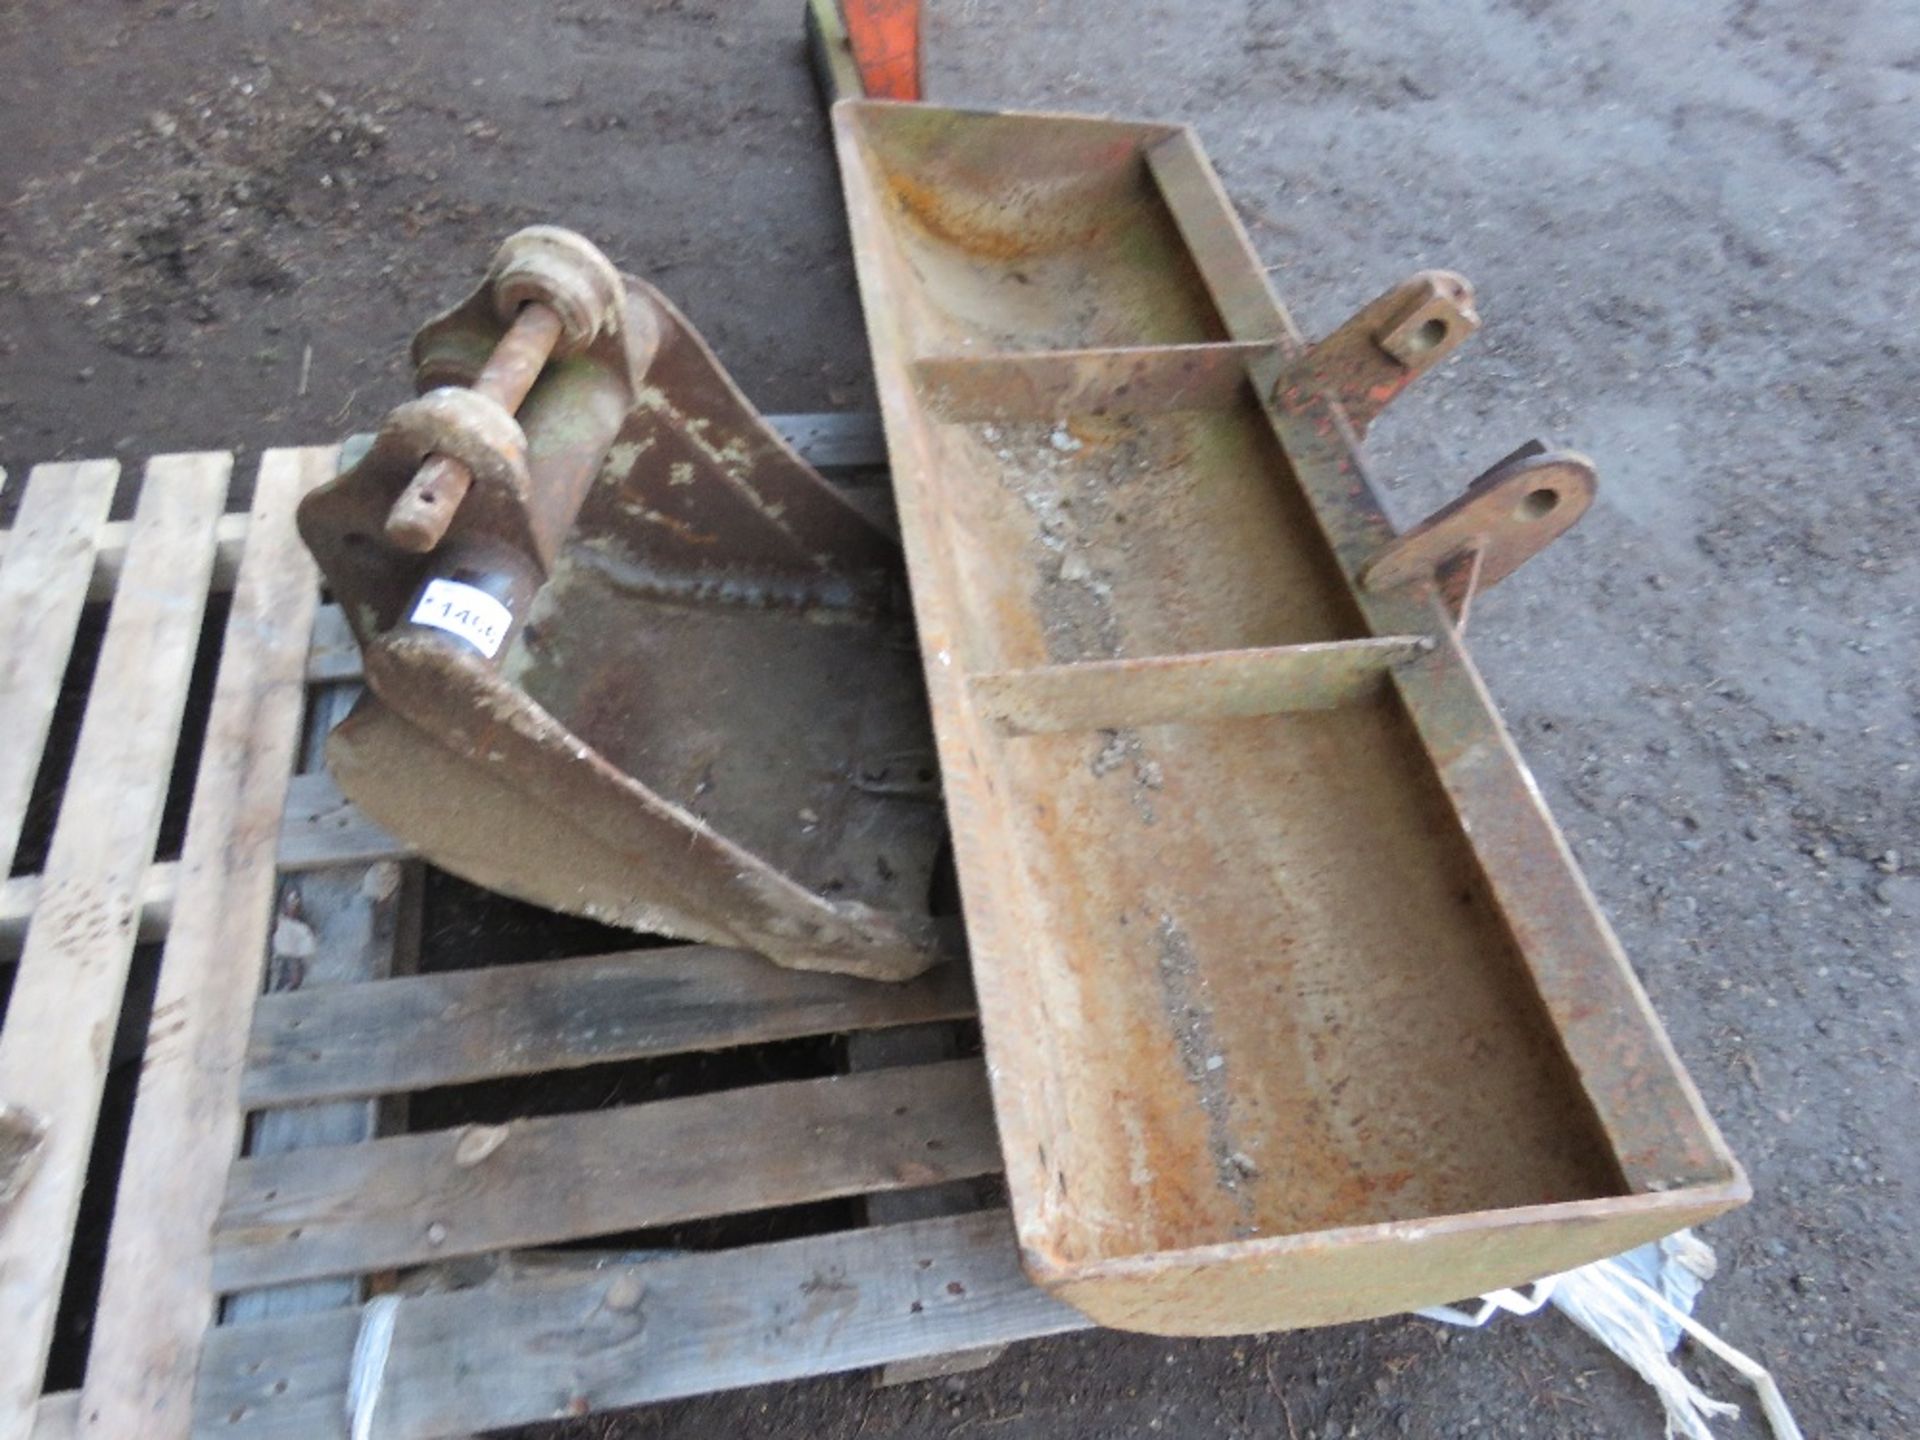 2 X MINI EXCAVATOR BUCKETS: JCB, 40MM PINS, 18" AND GRADING. THIS LOT IS SOLD UNDER THE AUCTIONE